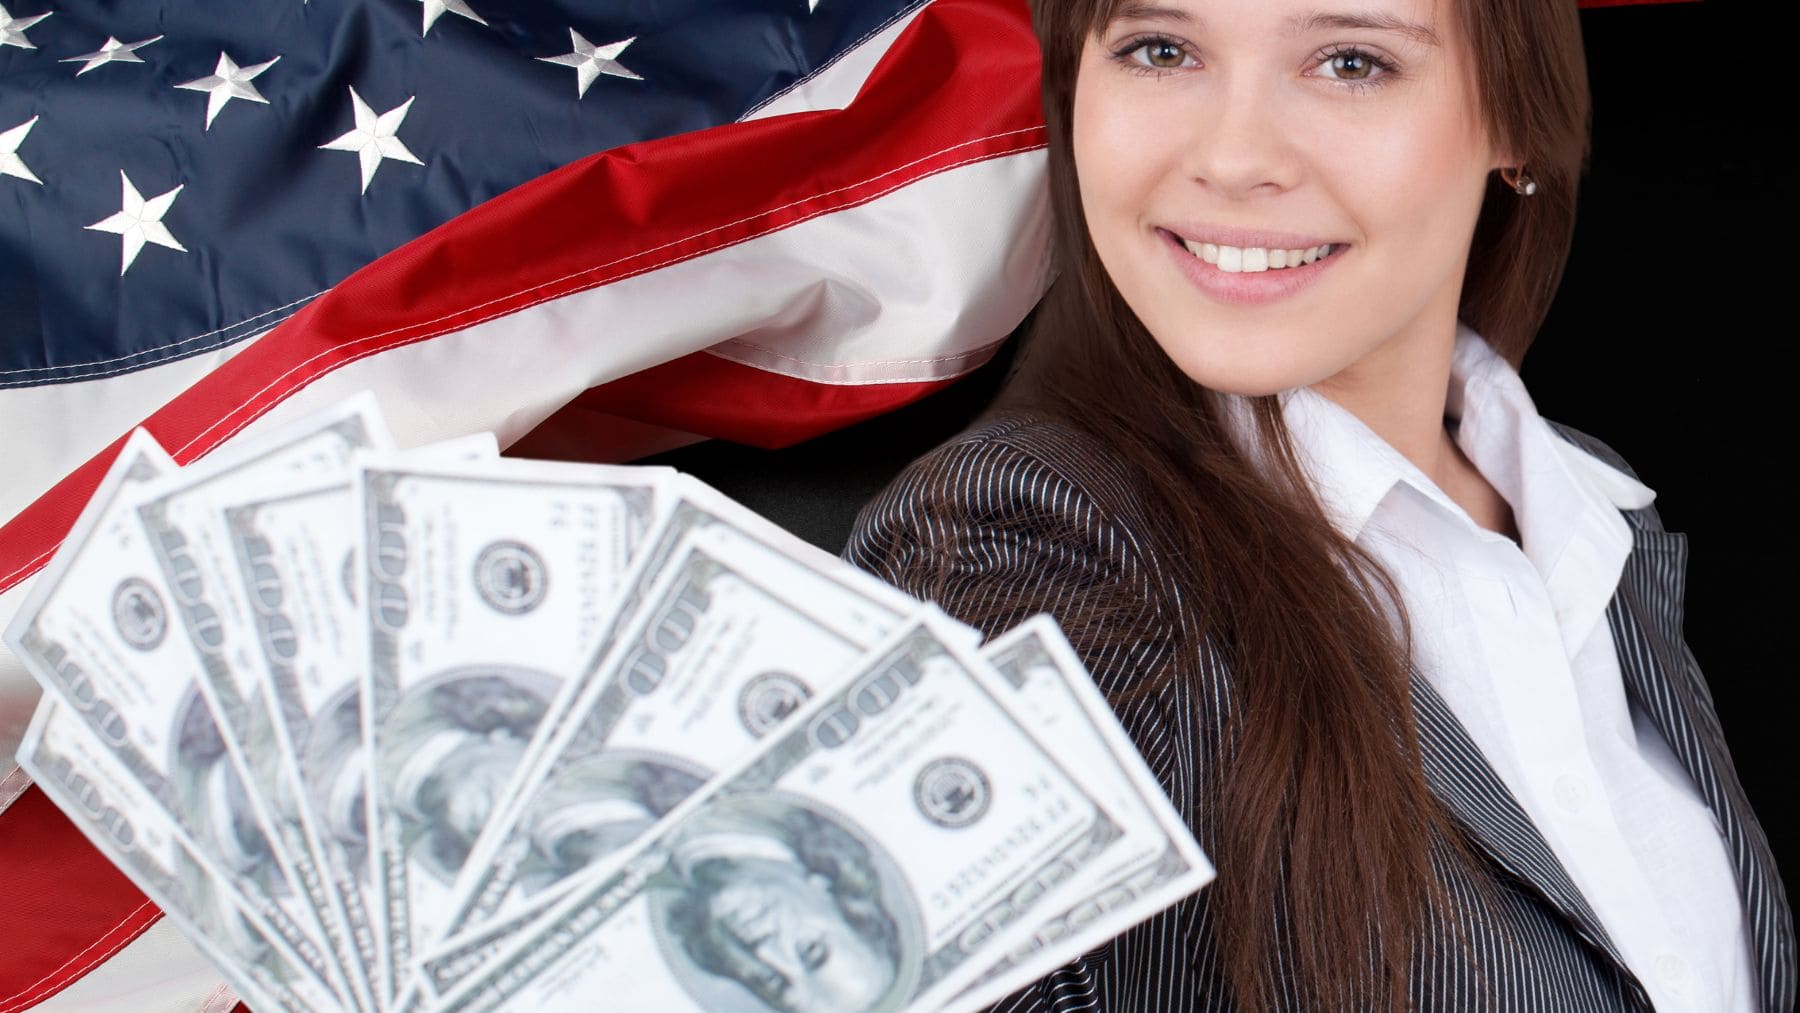 Woman holding the Tax Refund money with an American Flag